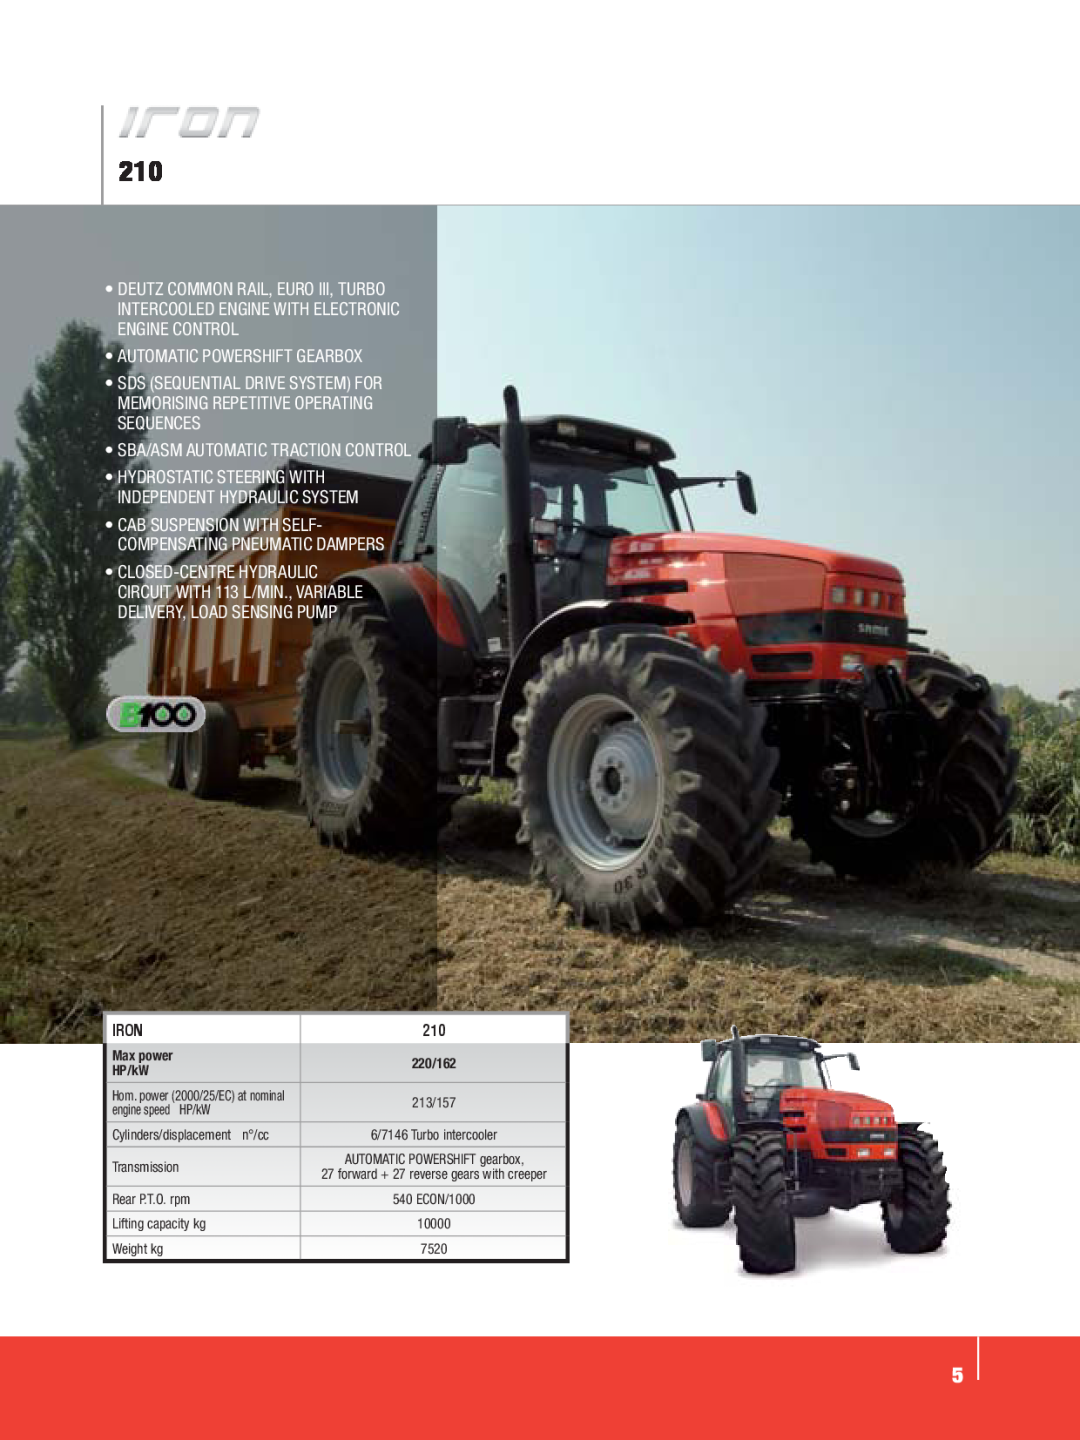 SAME Tractors manual •Automatic Powershift Gearbox, •Sba/Asm Automatic Traction Control, Iron 